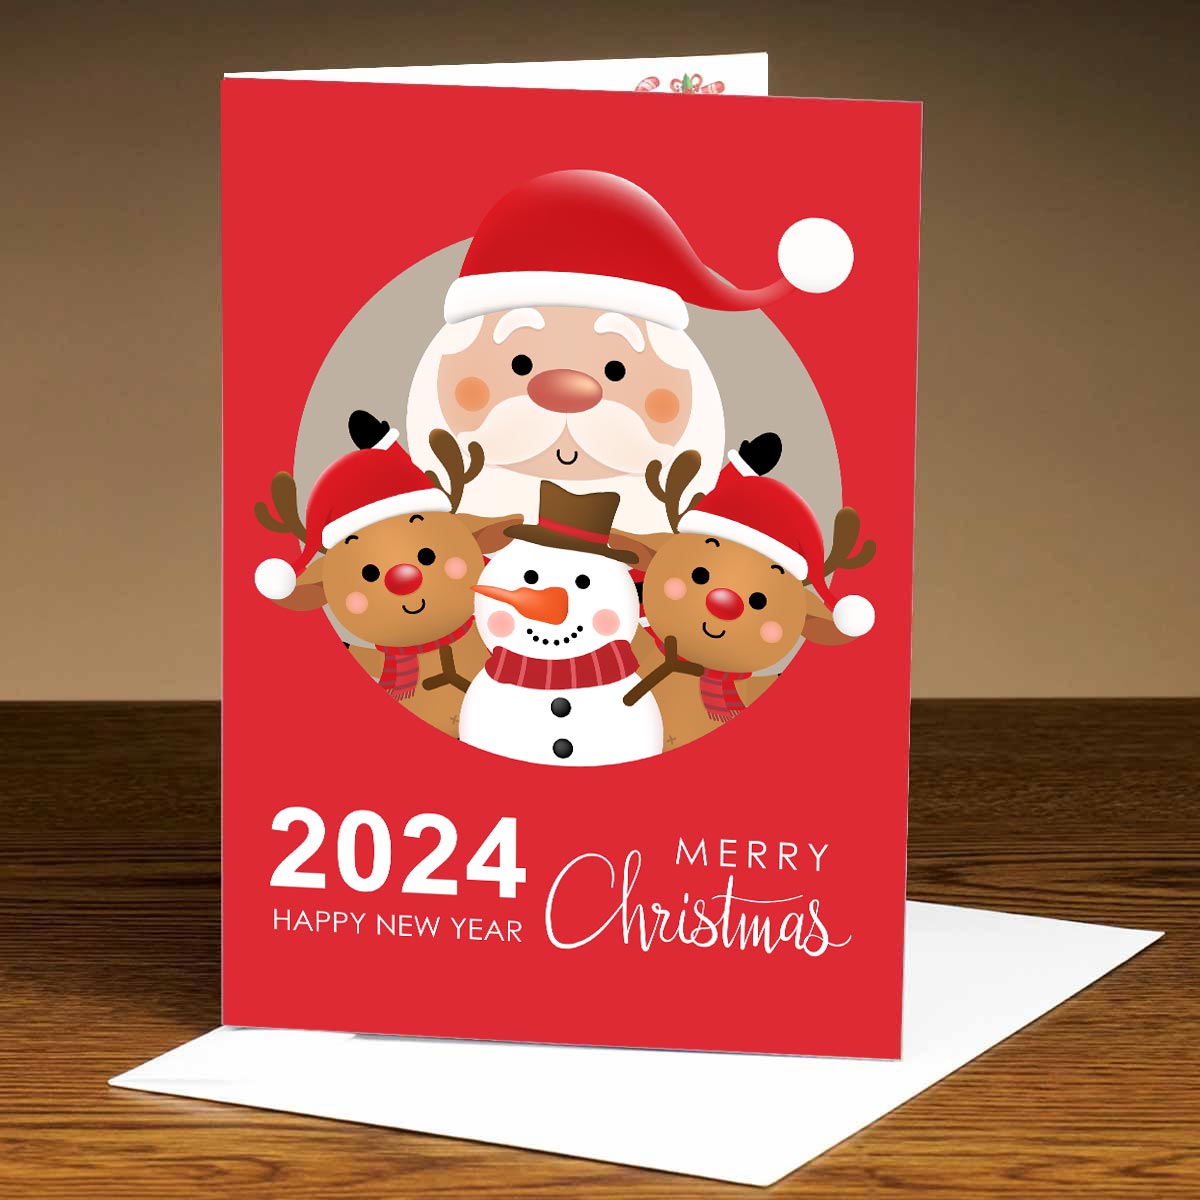 Merry Christmas & New Year Wishes Card